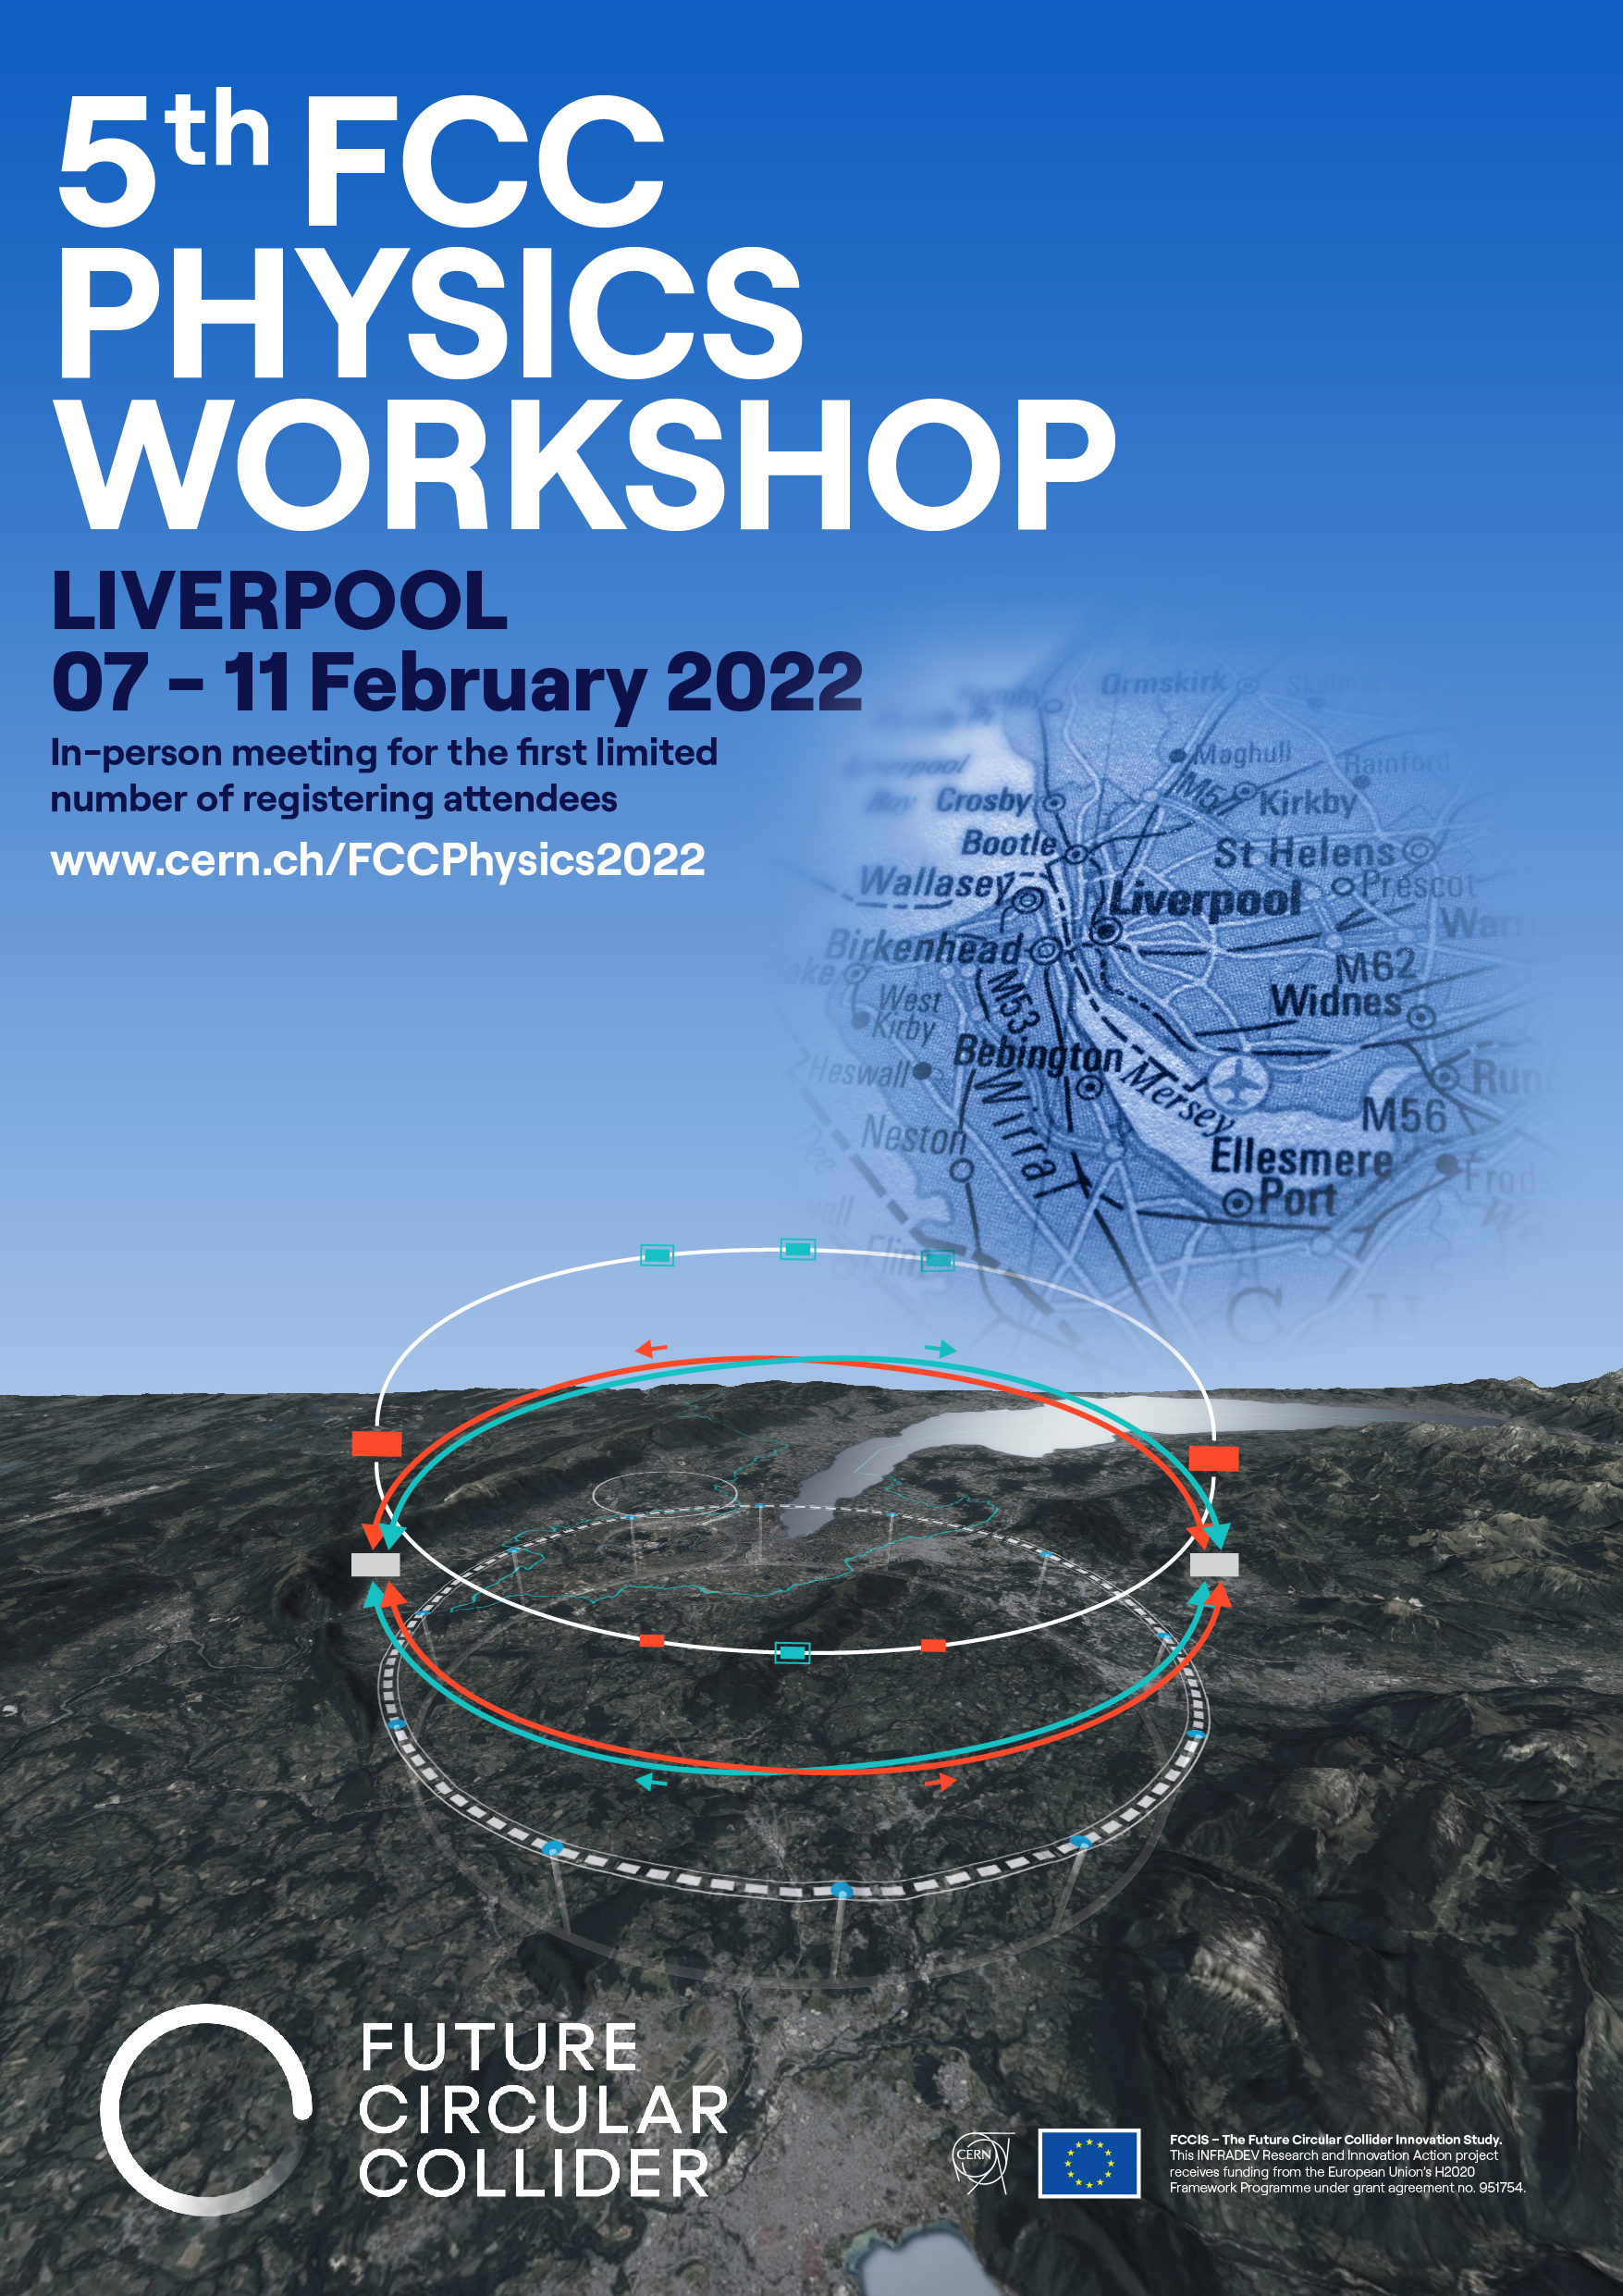 5th FCC Physics workshop in Liverpool